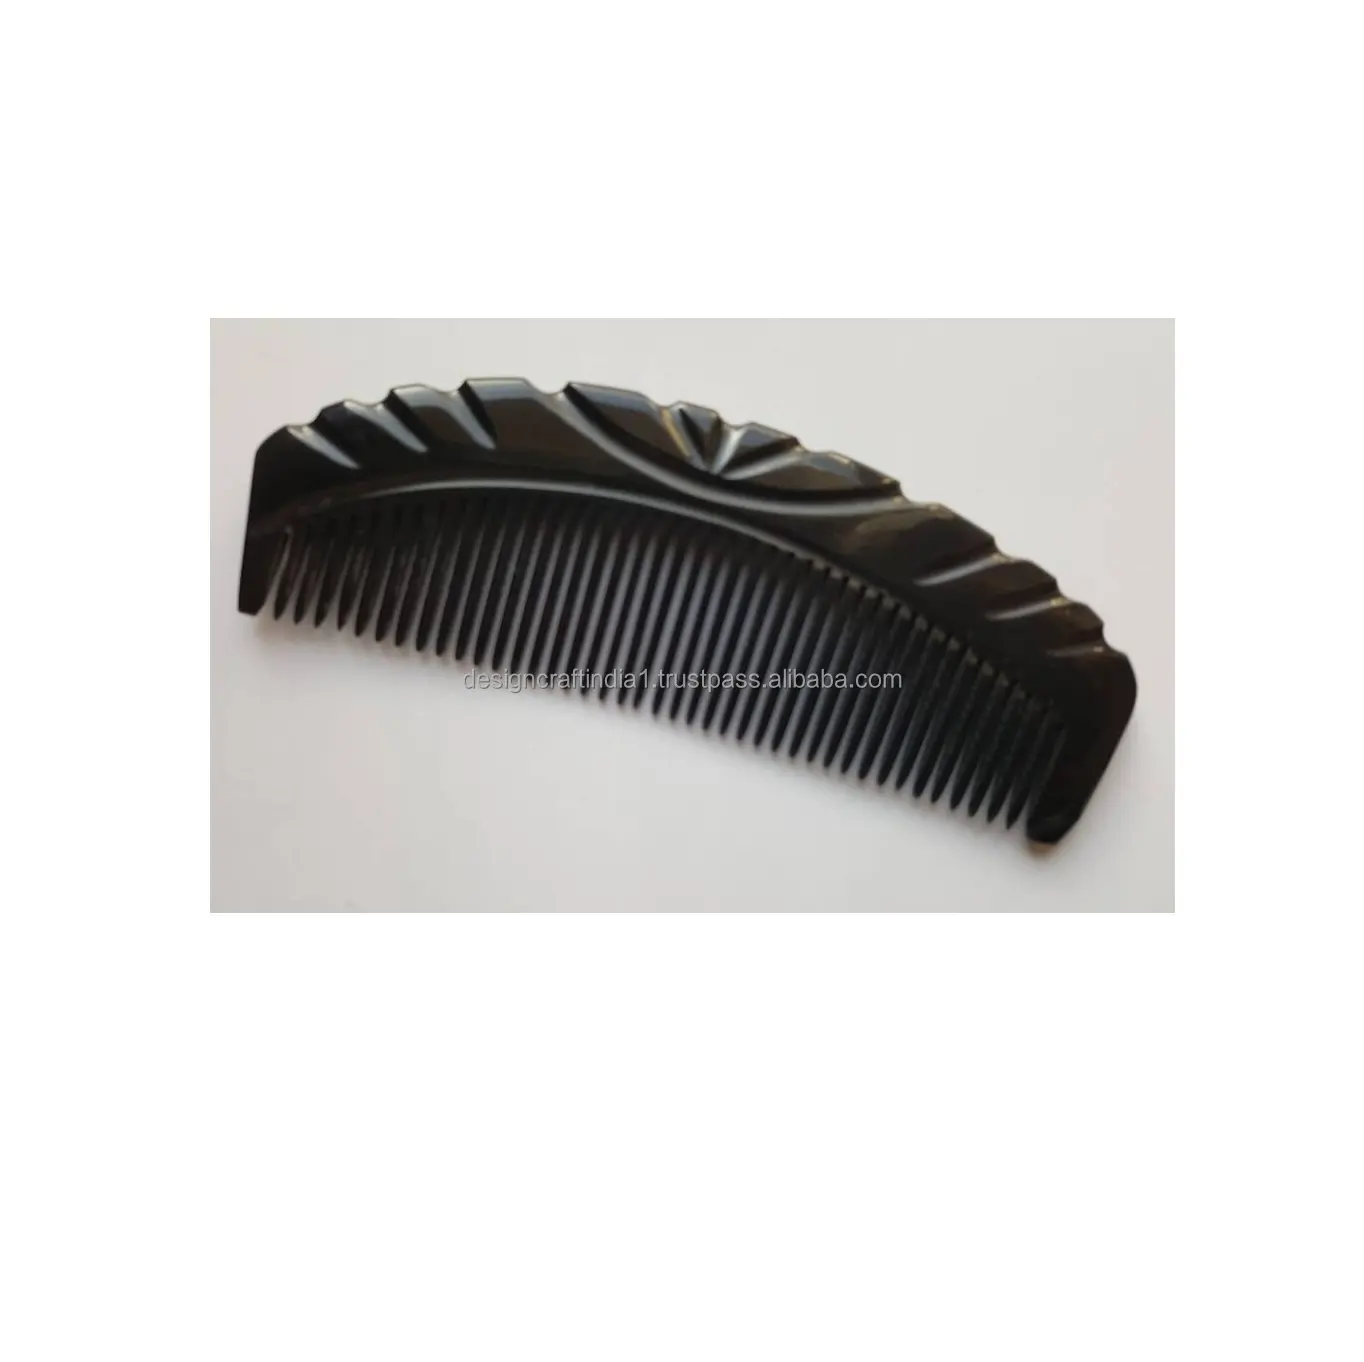 Wholesale Natural Buffalo Horn Combs polished with smooth teeth for Adults Available at Bulk Quantity